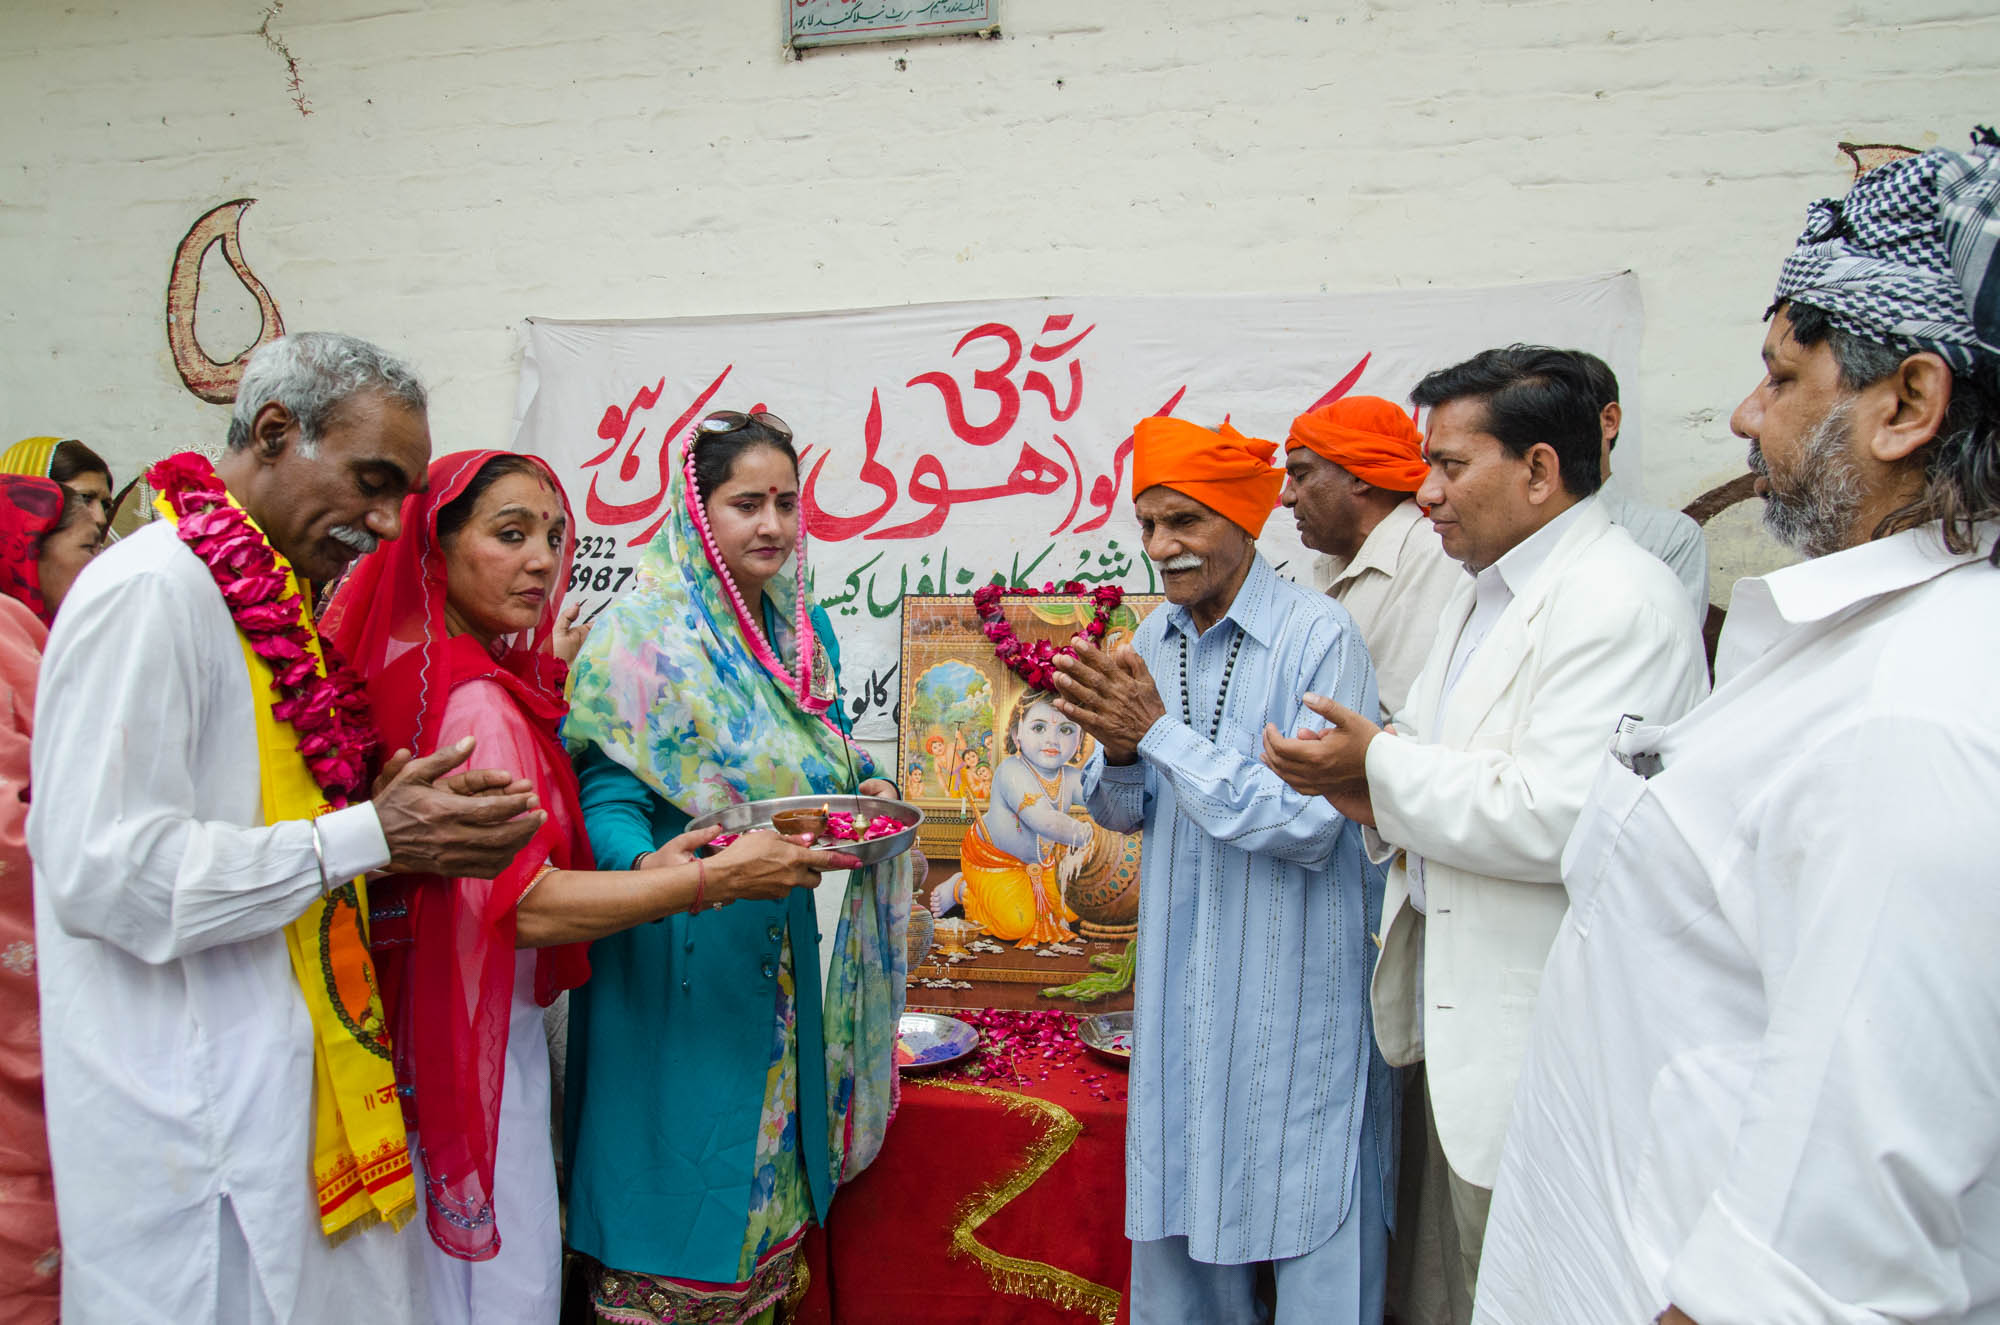  At the Valimiki Mandir in Lahore’s Anarkali bazaar, the Hindu community of Lahore praying for the prosperity of Pakistan on the event of Holi. Holi symbolises the arrival of spring. 